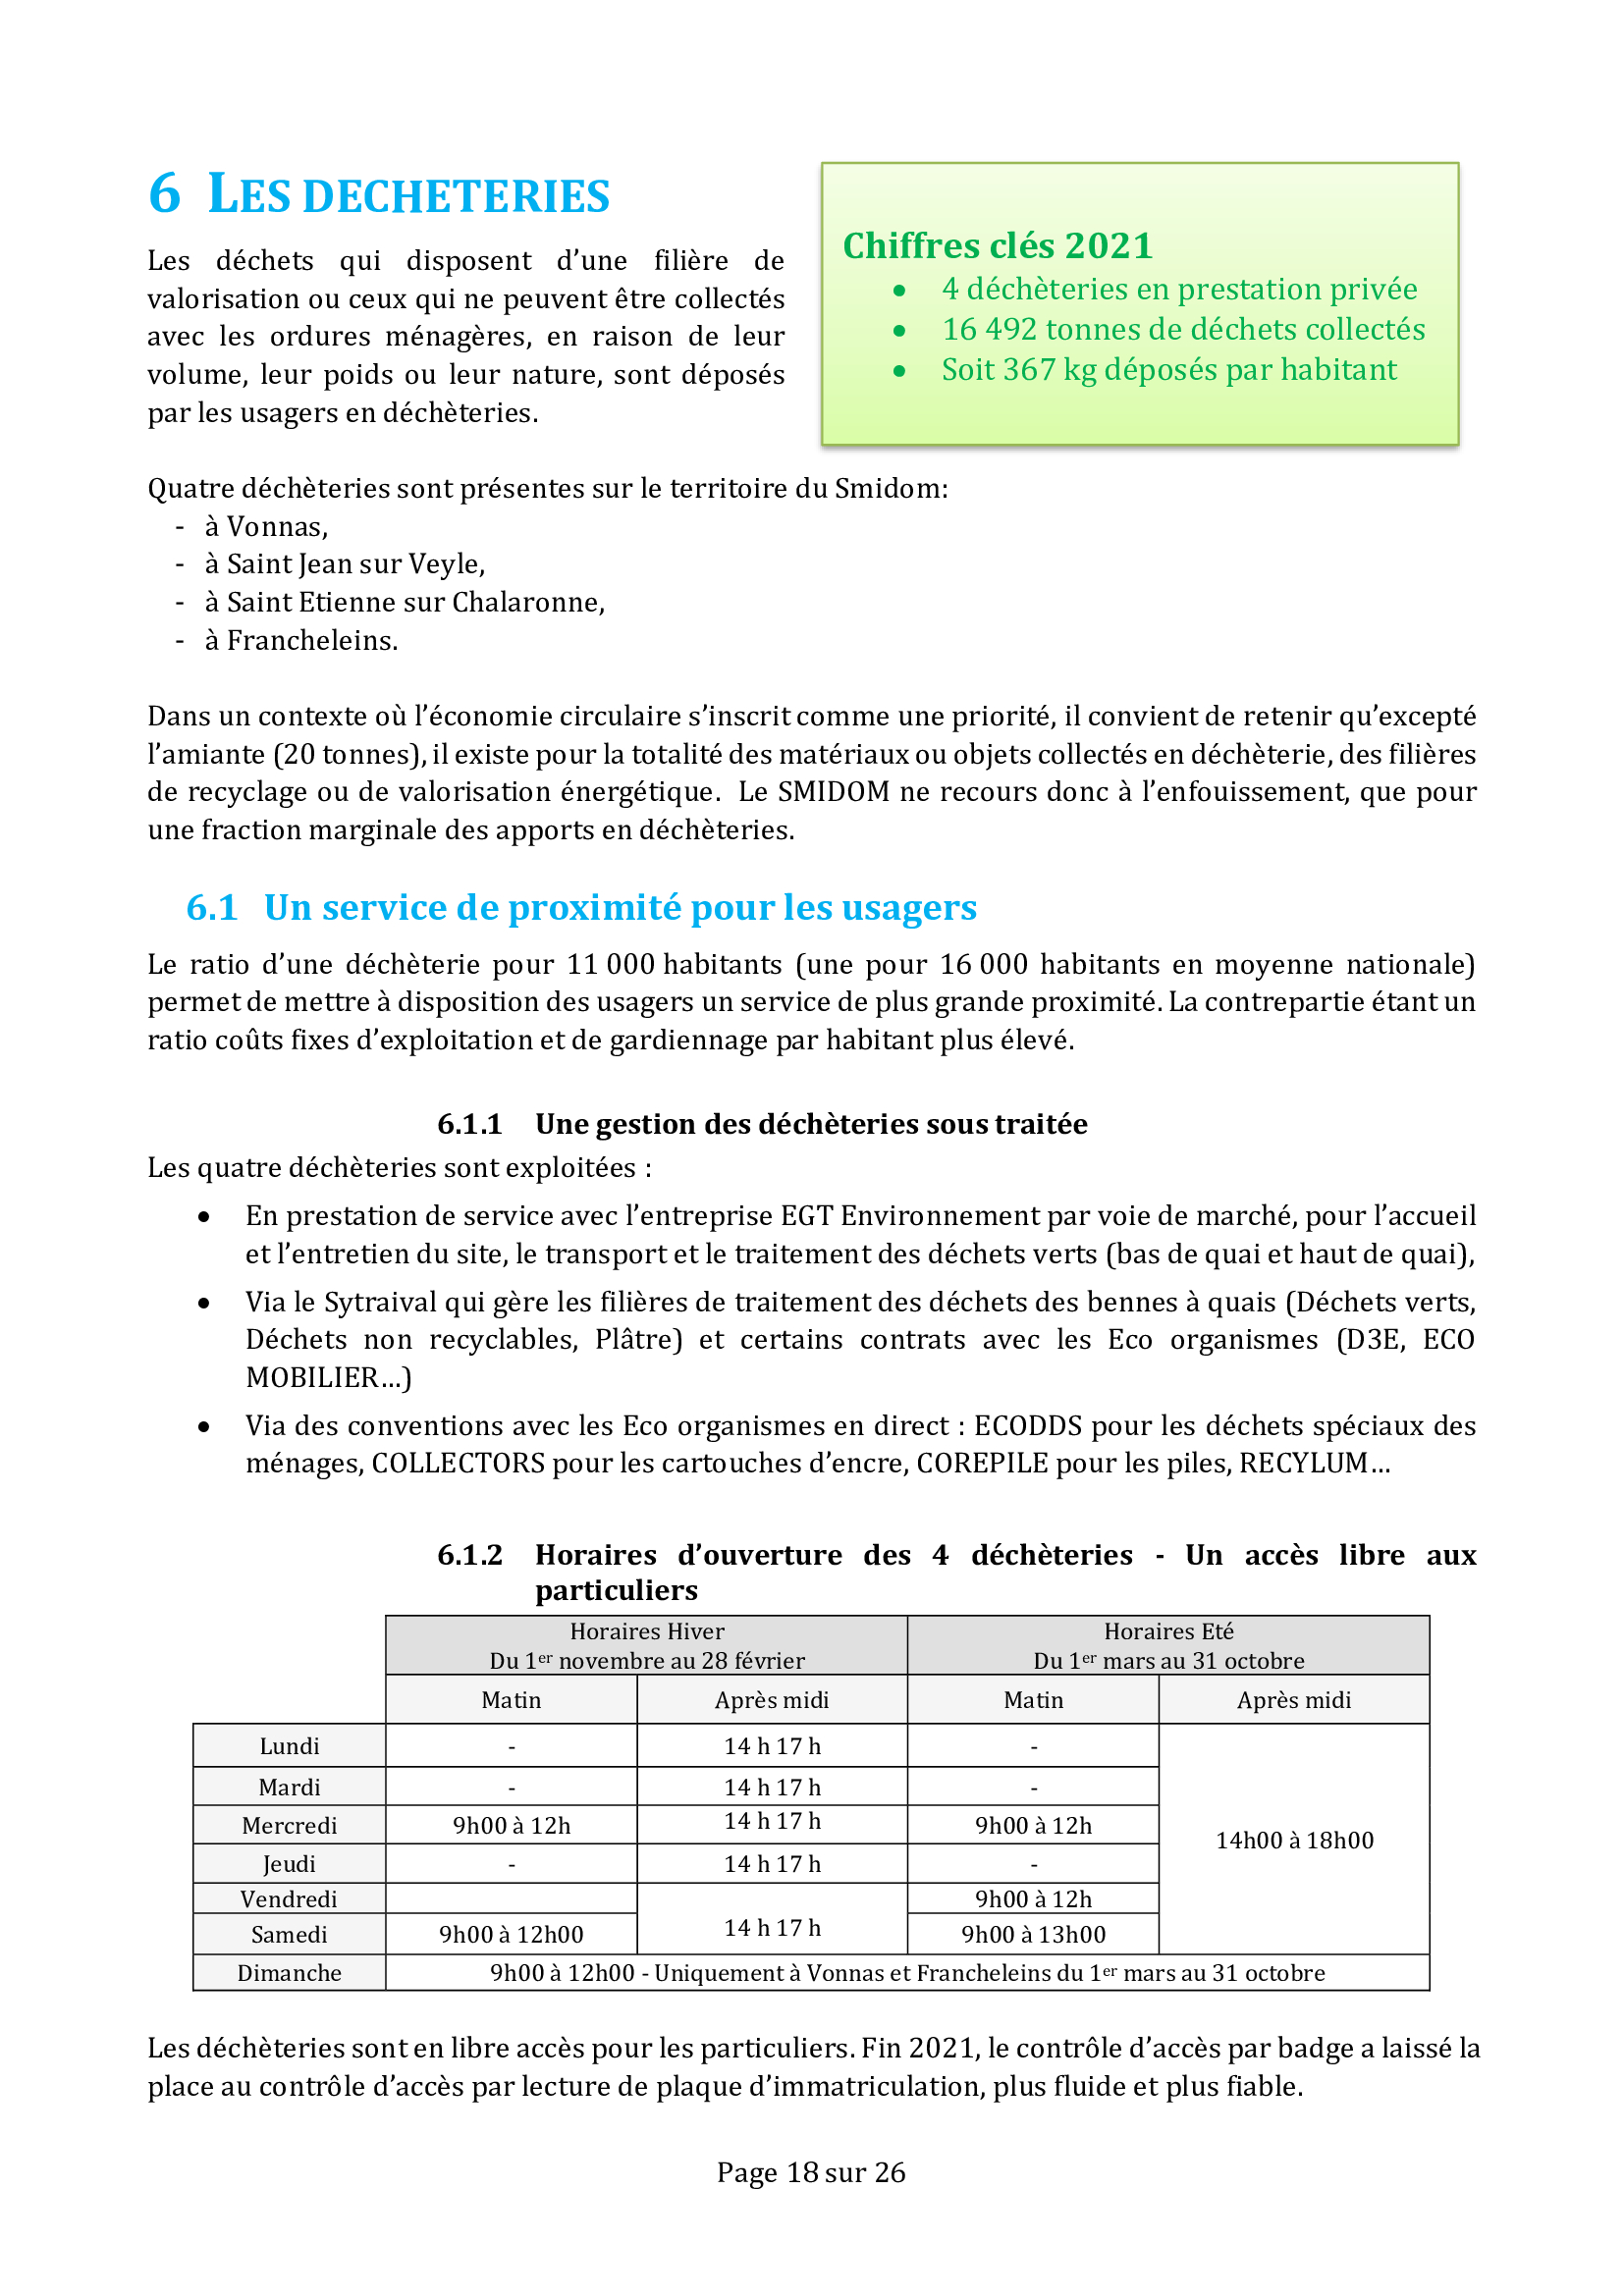 2021 - Rapport annuel - page 18.jpg